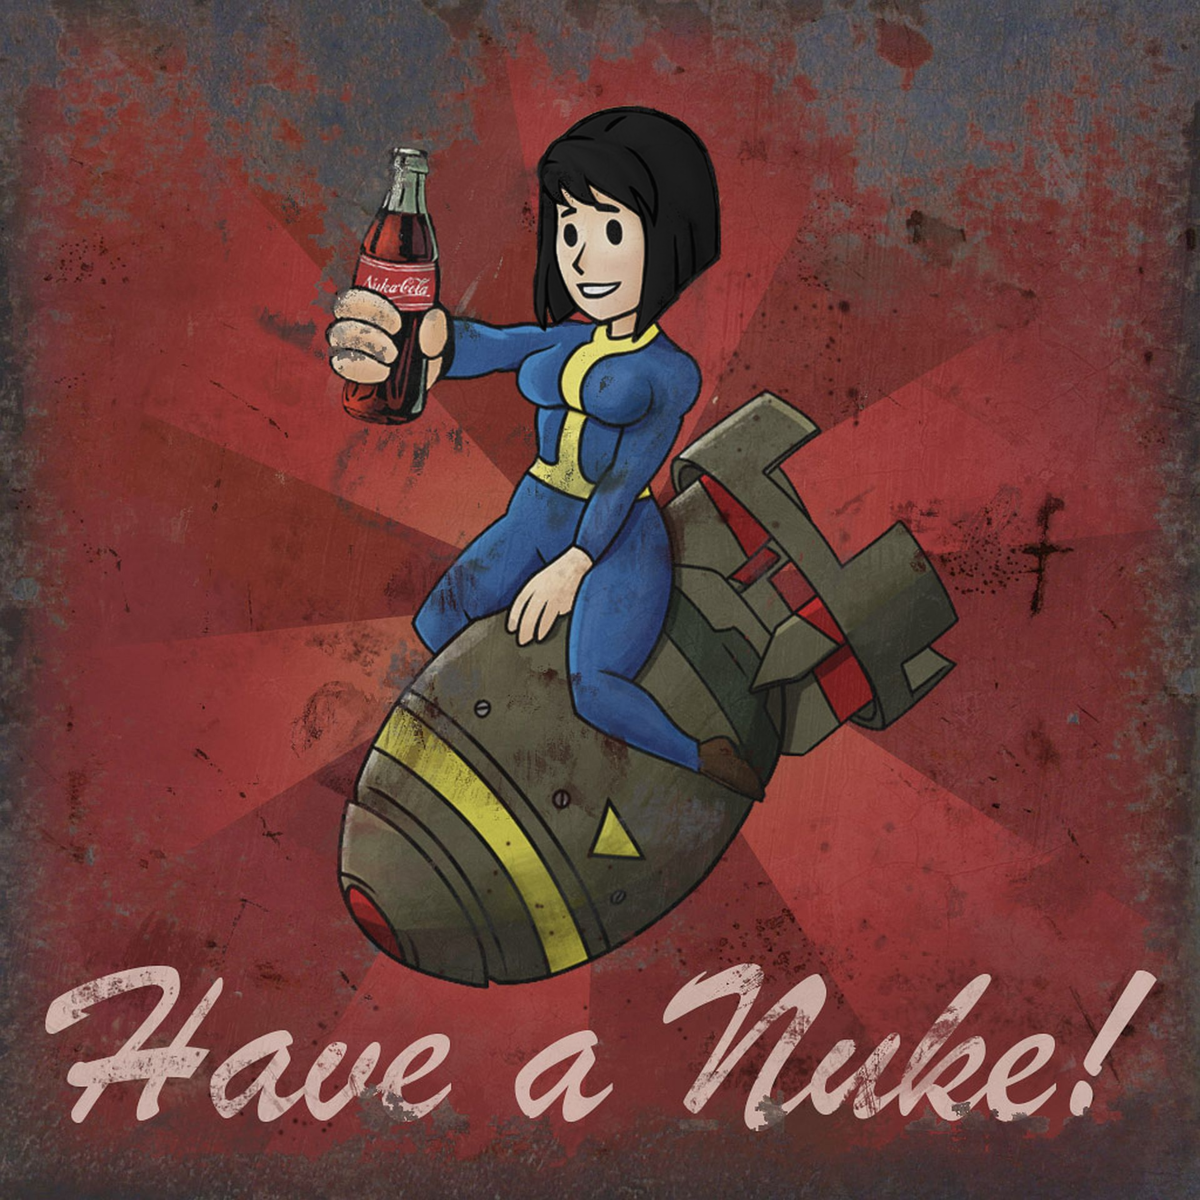 Sugar bombs fallout. Nuka Cola Fallout девушка. Фоллаут Ваулт герл. Fallout 3 плакаты ВОЛТЕК. Фоллаут 4 Vault girl.